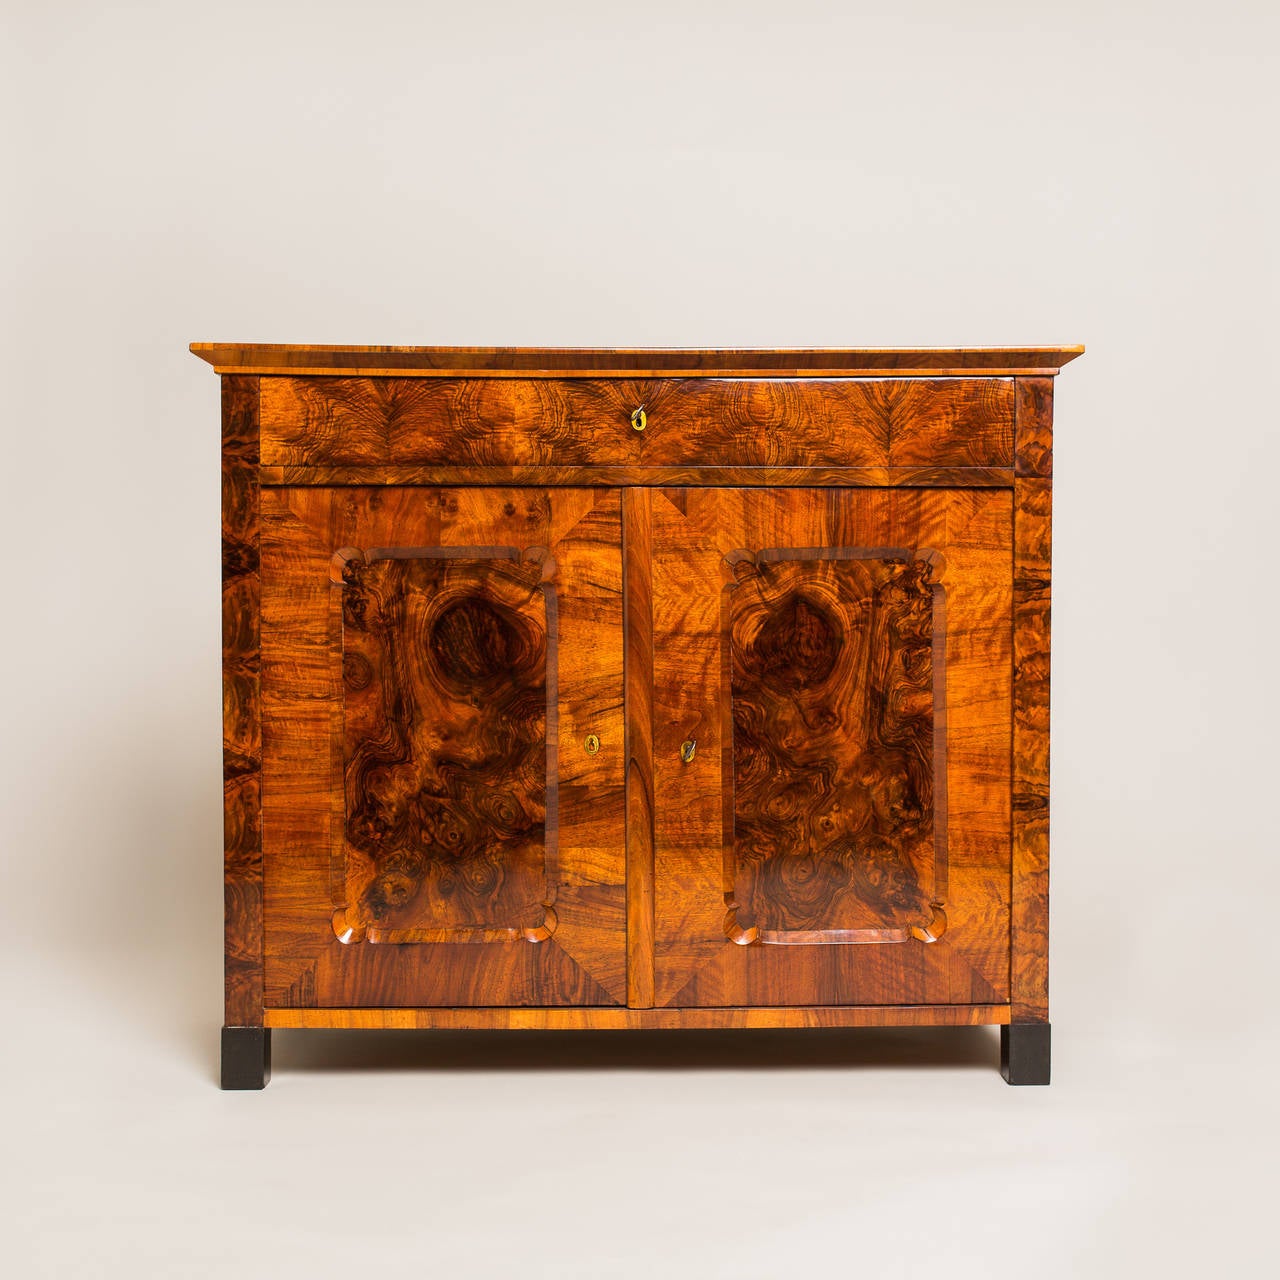 This beautifully arranged half cabinet/sideboard fits effortlessly into any classic or contemporary interior design. Manufactured around 1845, its massive spruce body is topped by a walnut veneer that has been radiantly hand-polished with shellac.